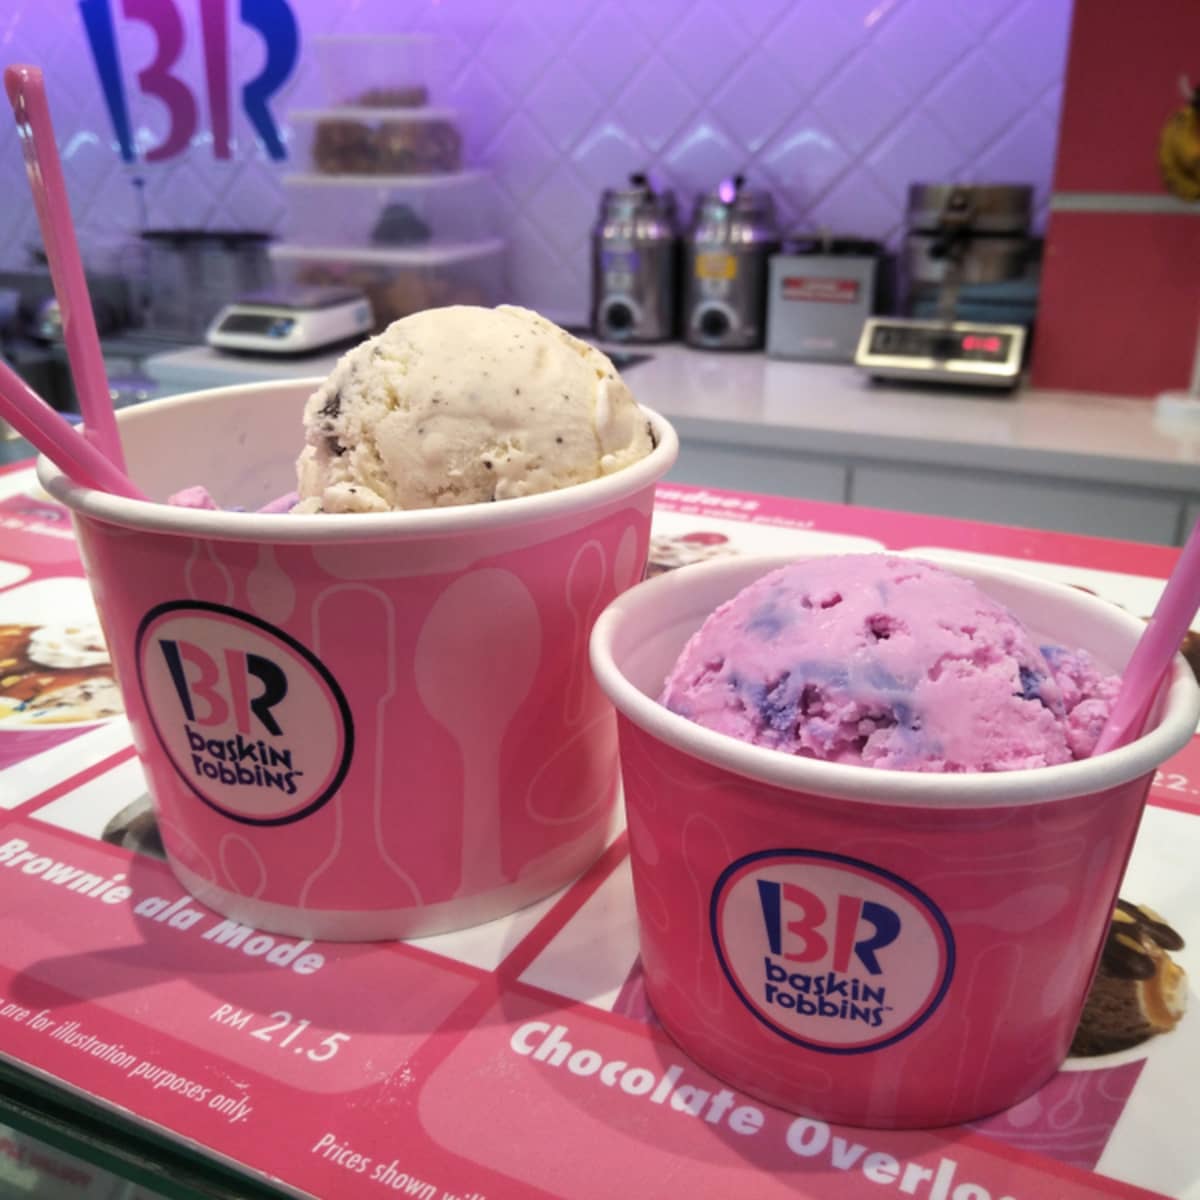 Baskin Robbins Changes Ownership to a New Family -